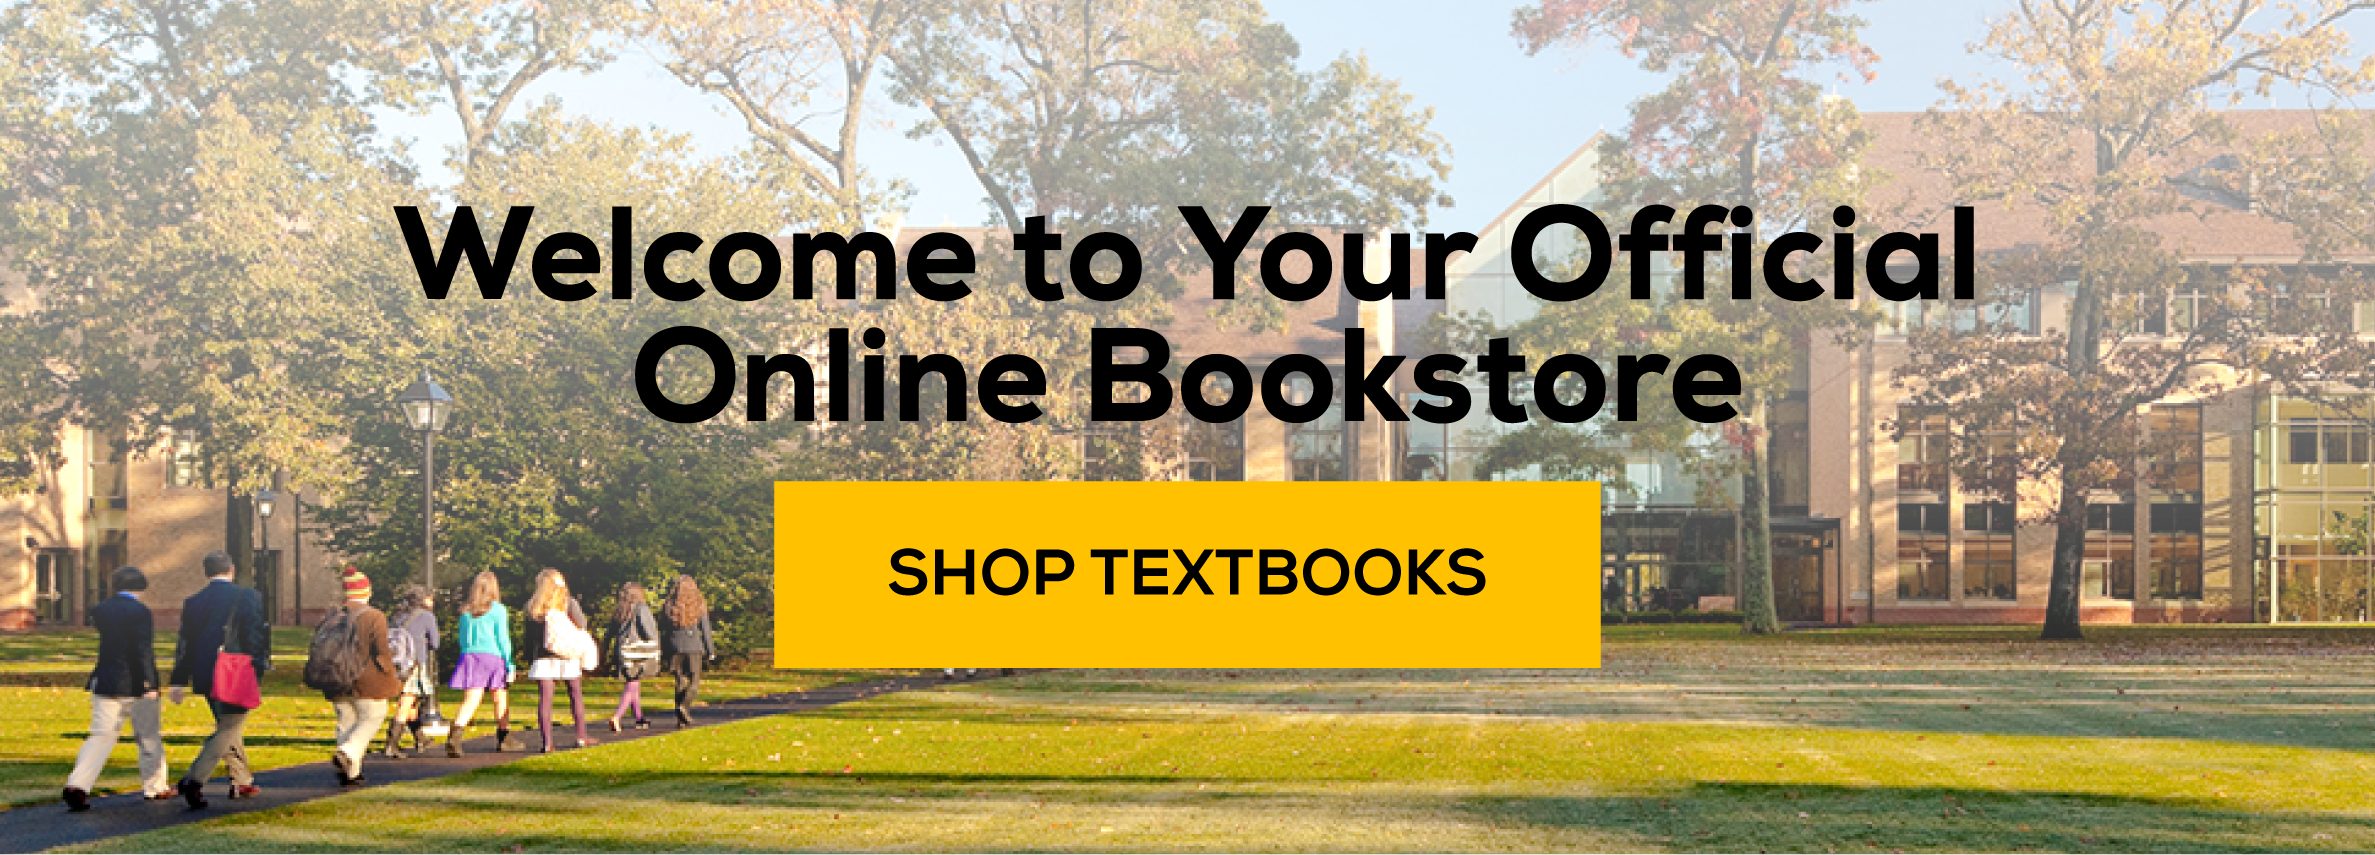 Welcome to your official online bookstore! Shop textbooks.